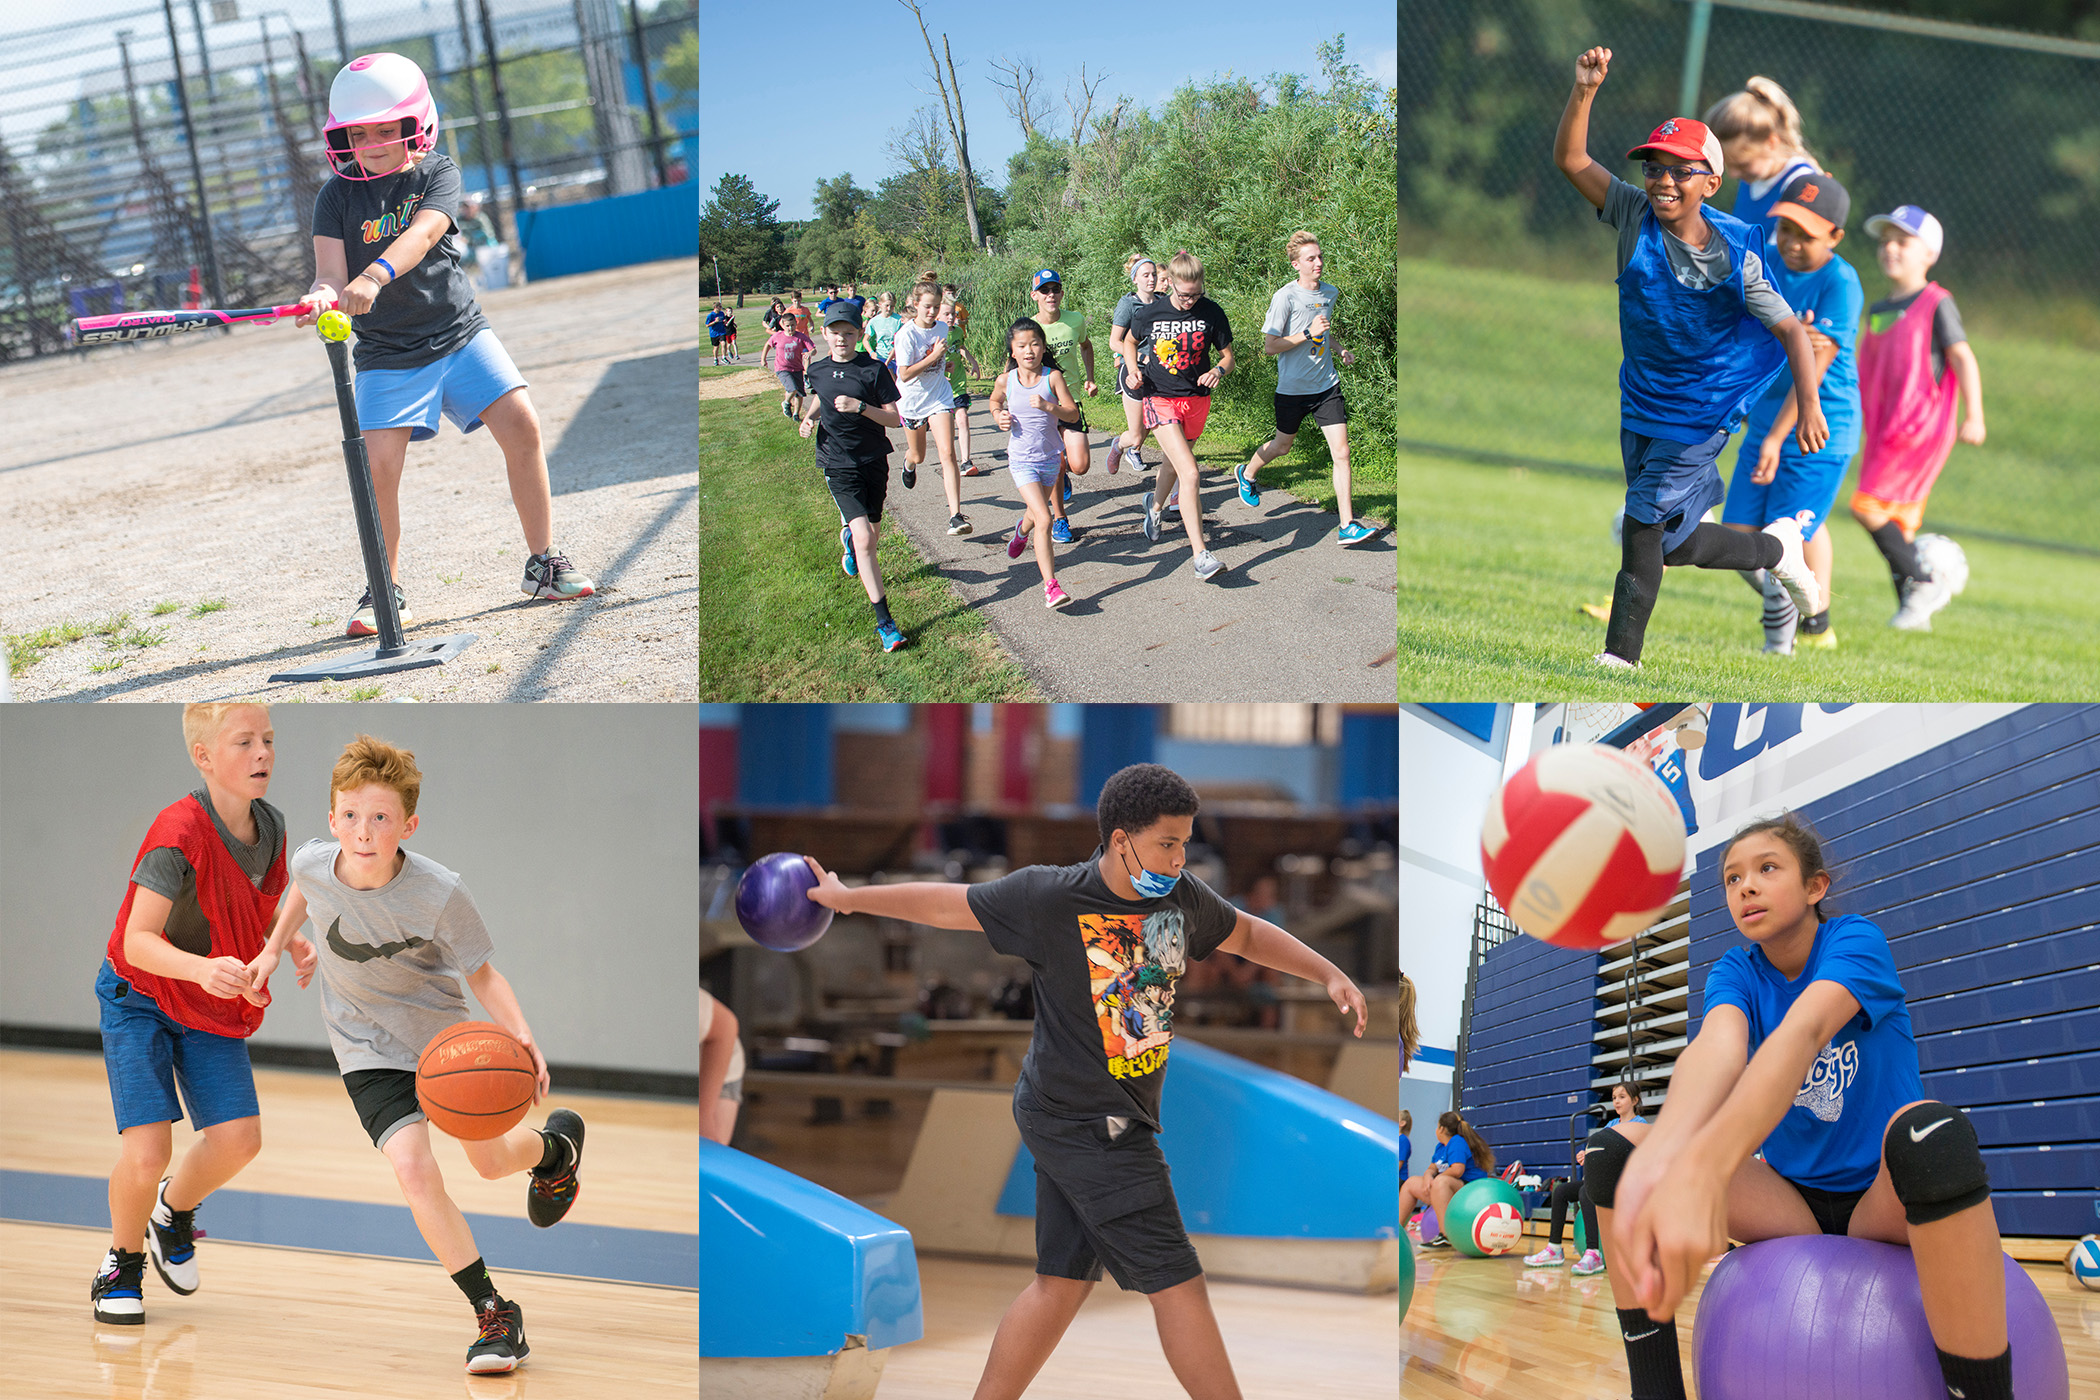 A collage of youth campers participating in various sports activities.